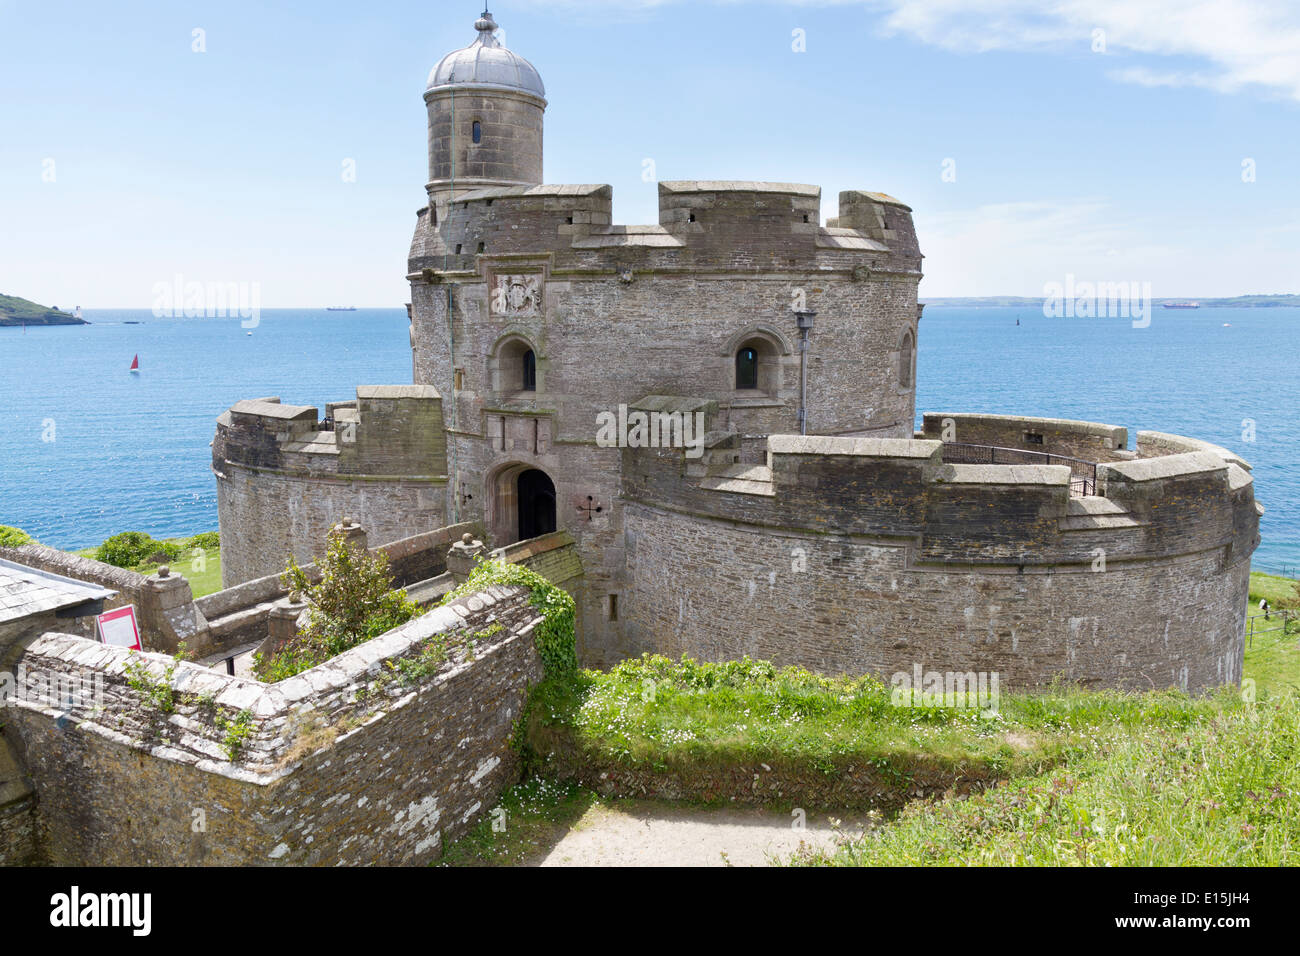 St Mawes Castle in St Mawes Cornwall, which is owned and managed by English Heritage Stock Photo